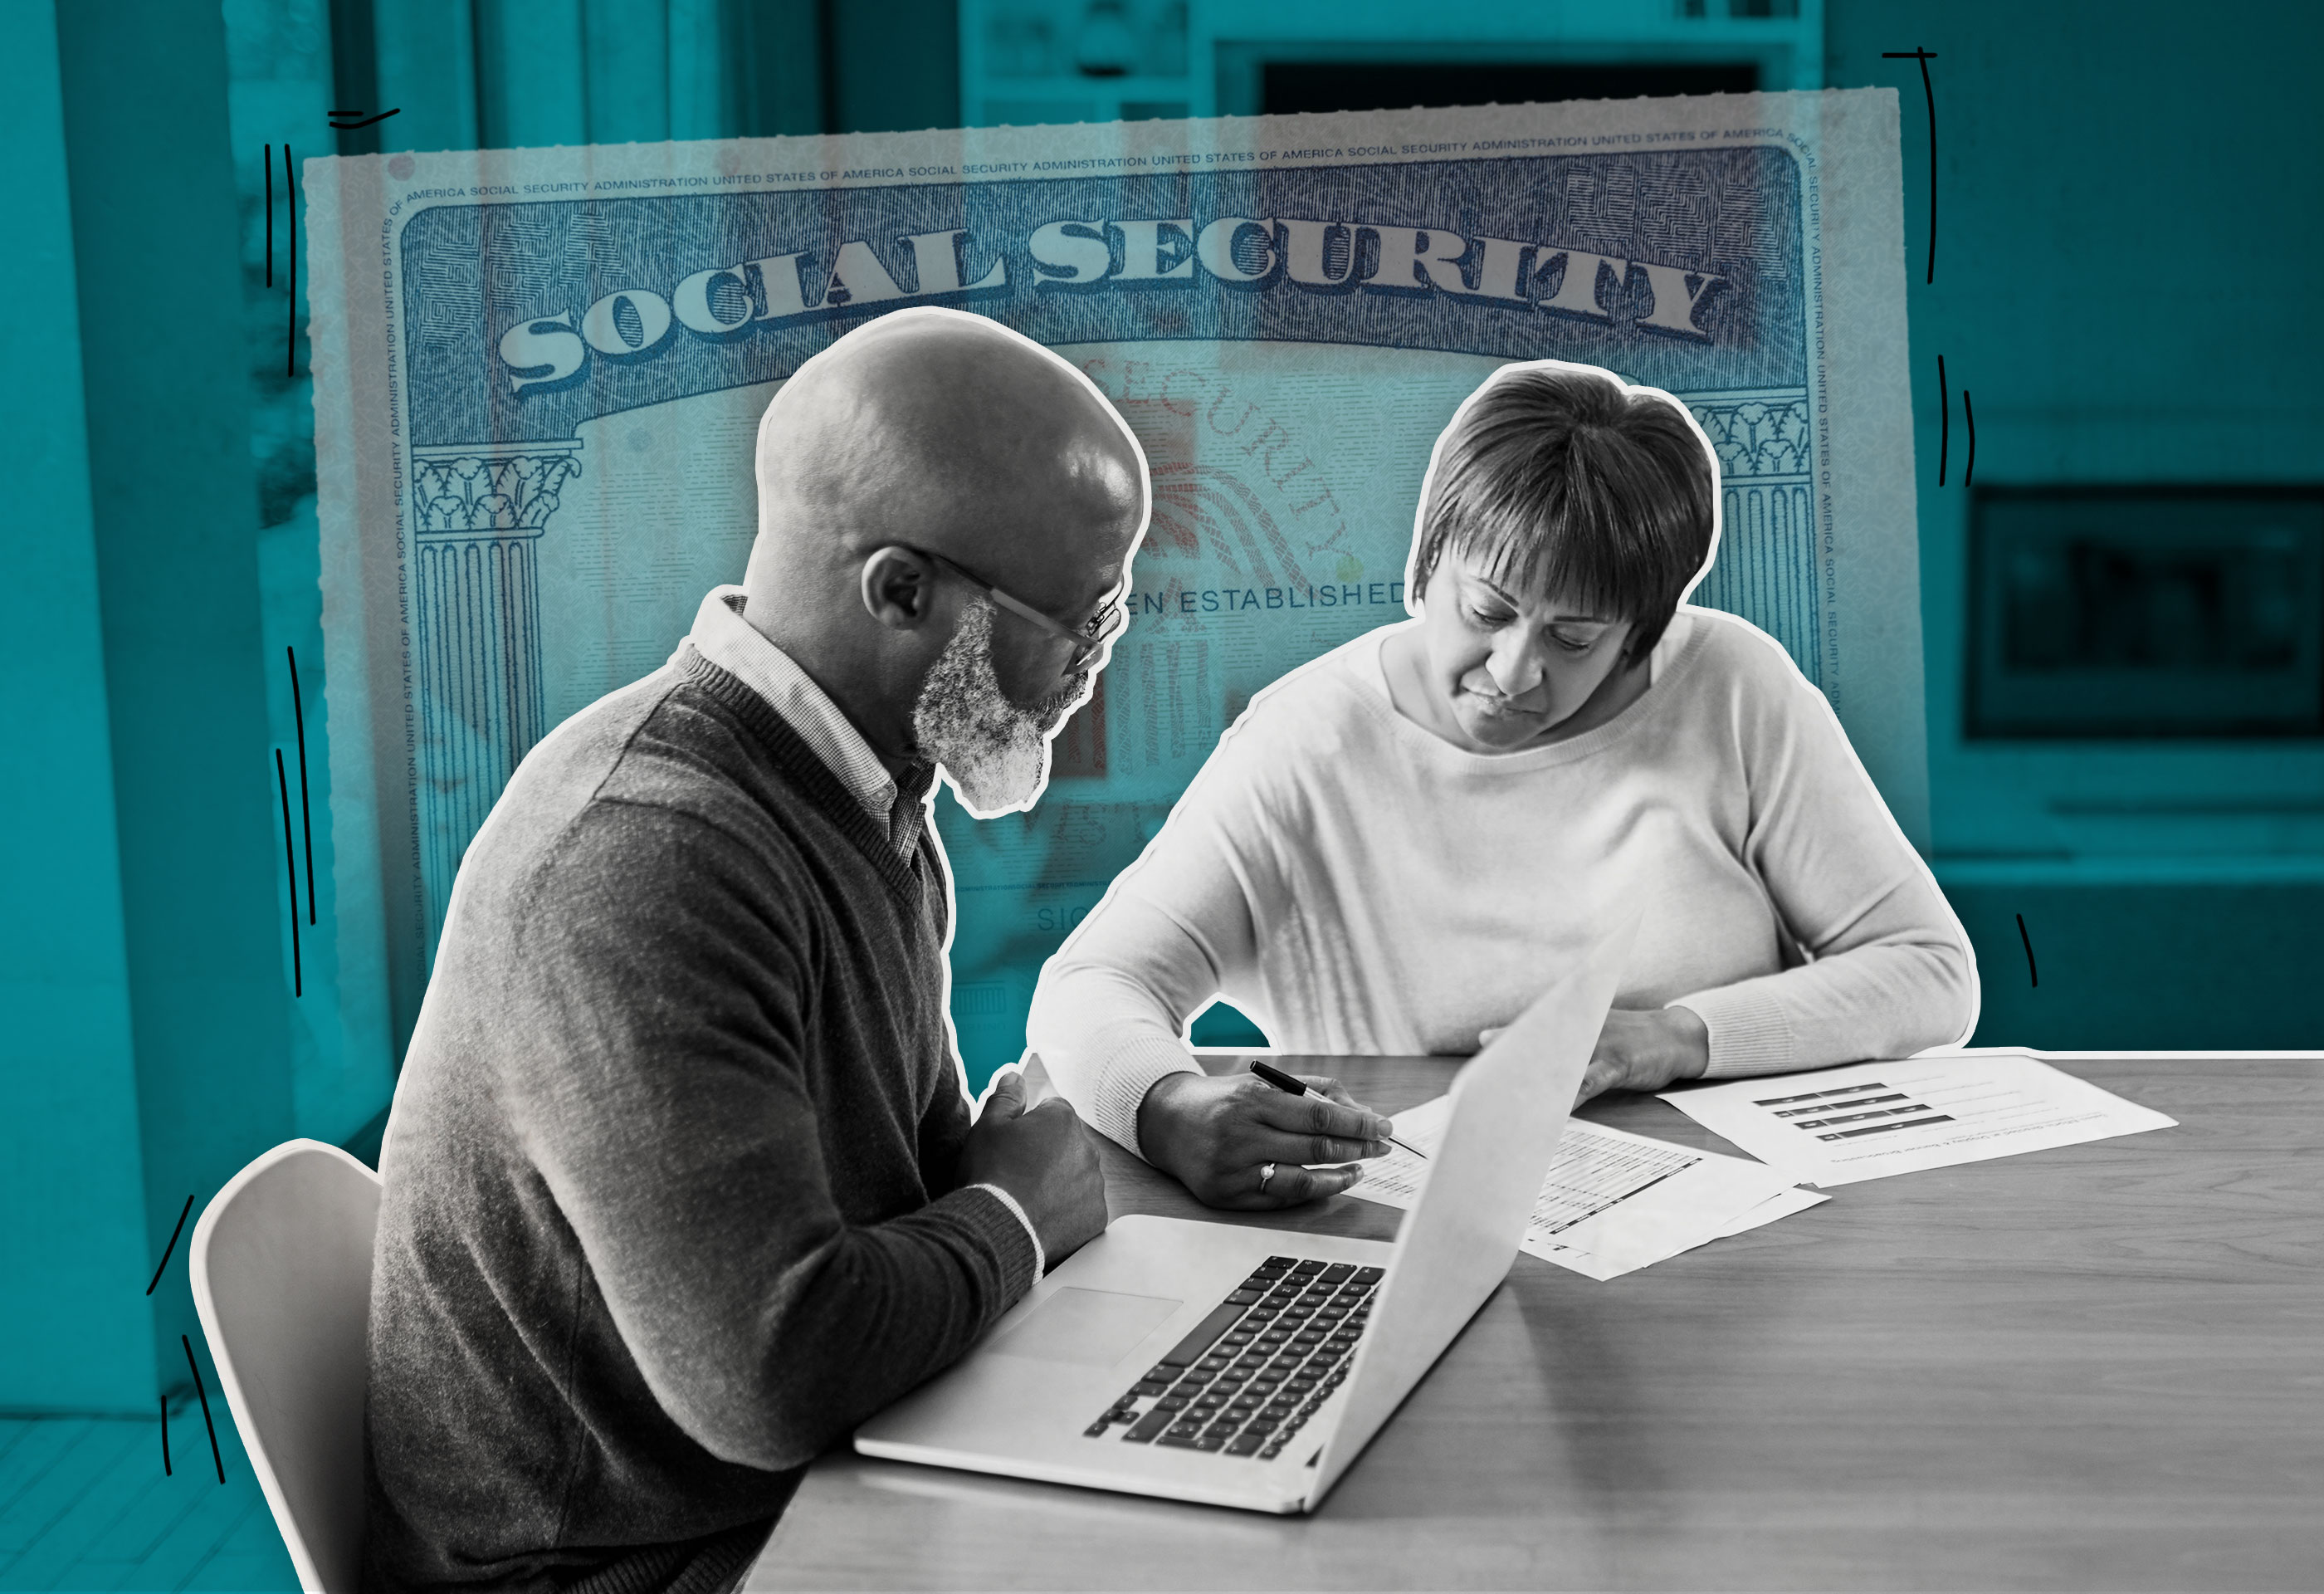 Misleading Headlines About Social Security Could Cost Retirees a Fortune